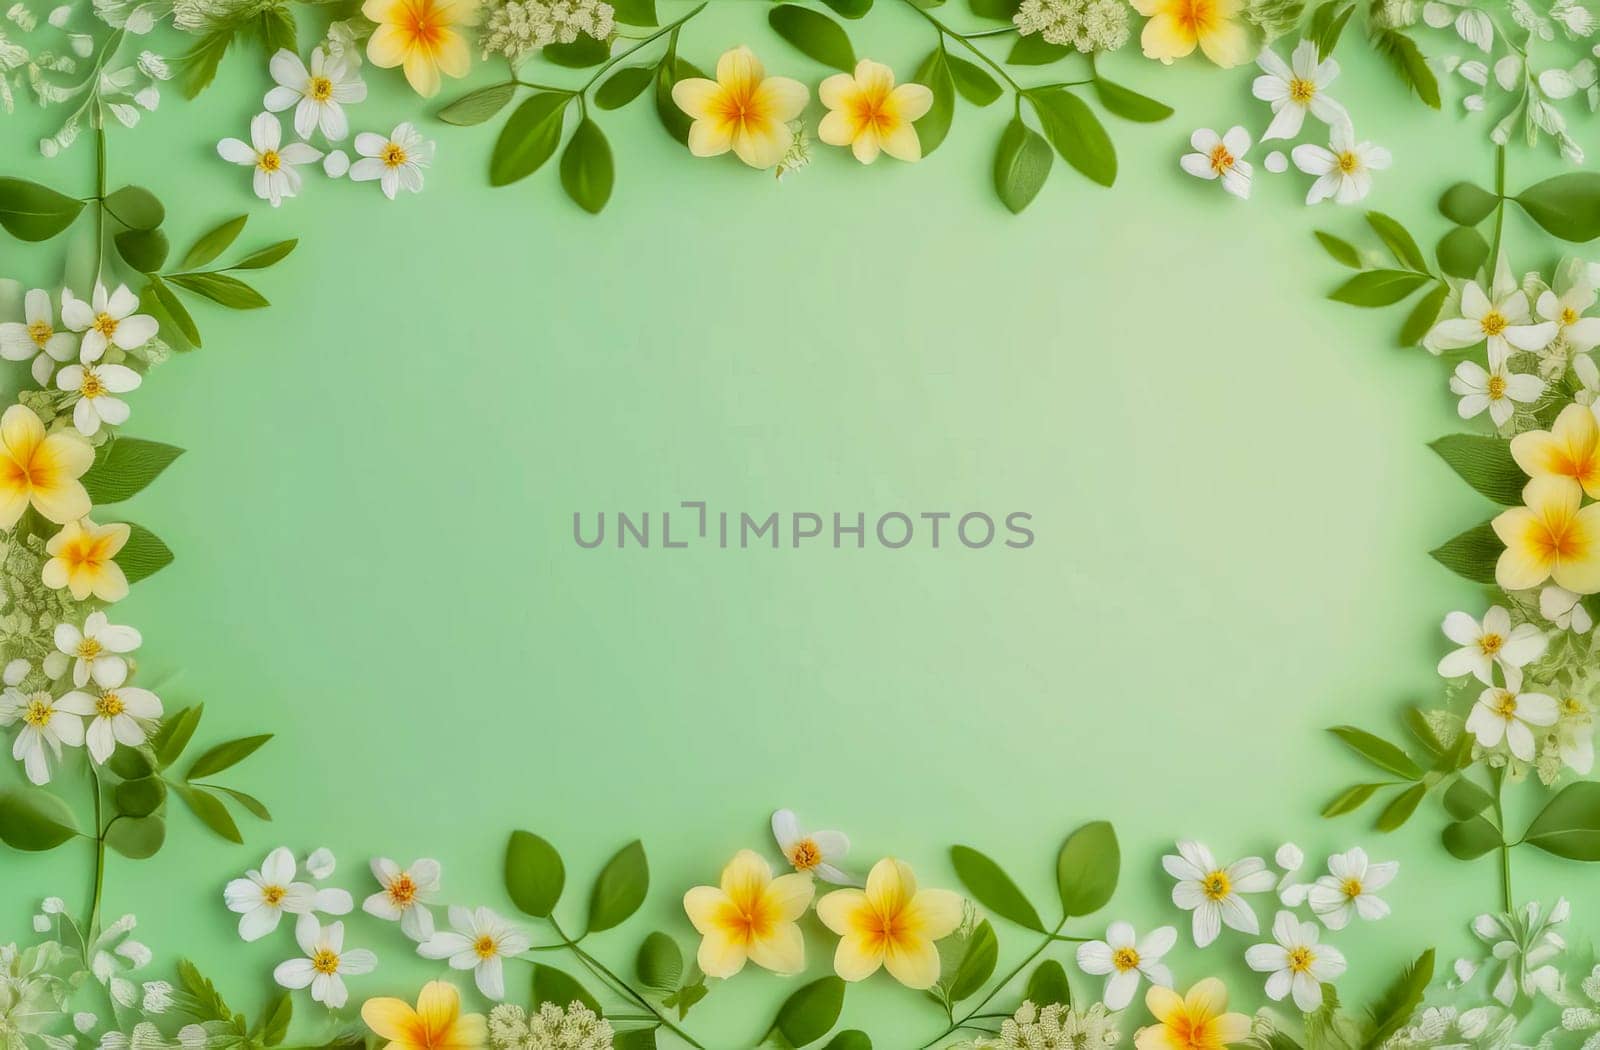 Summer background with leaves and small flowers on a delicate light green background. Place for text.